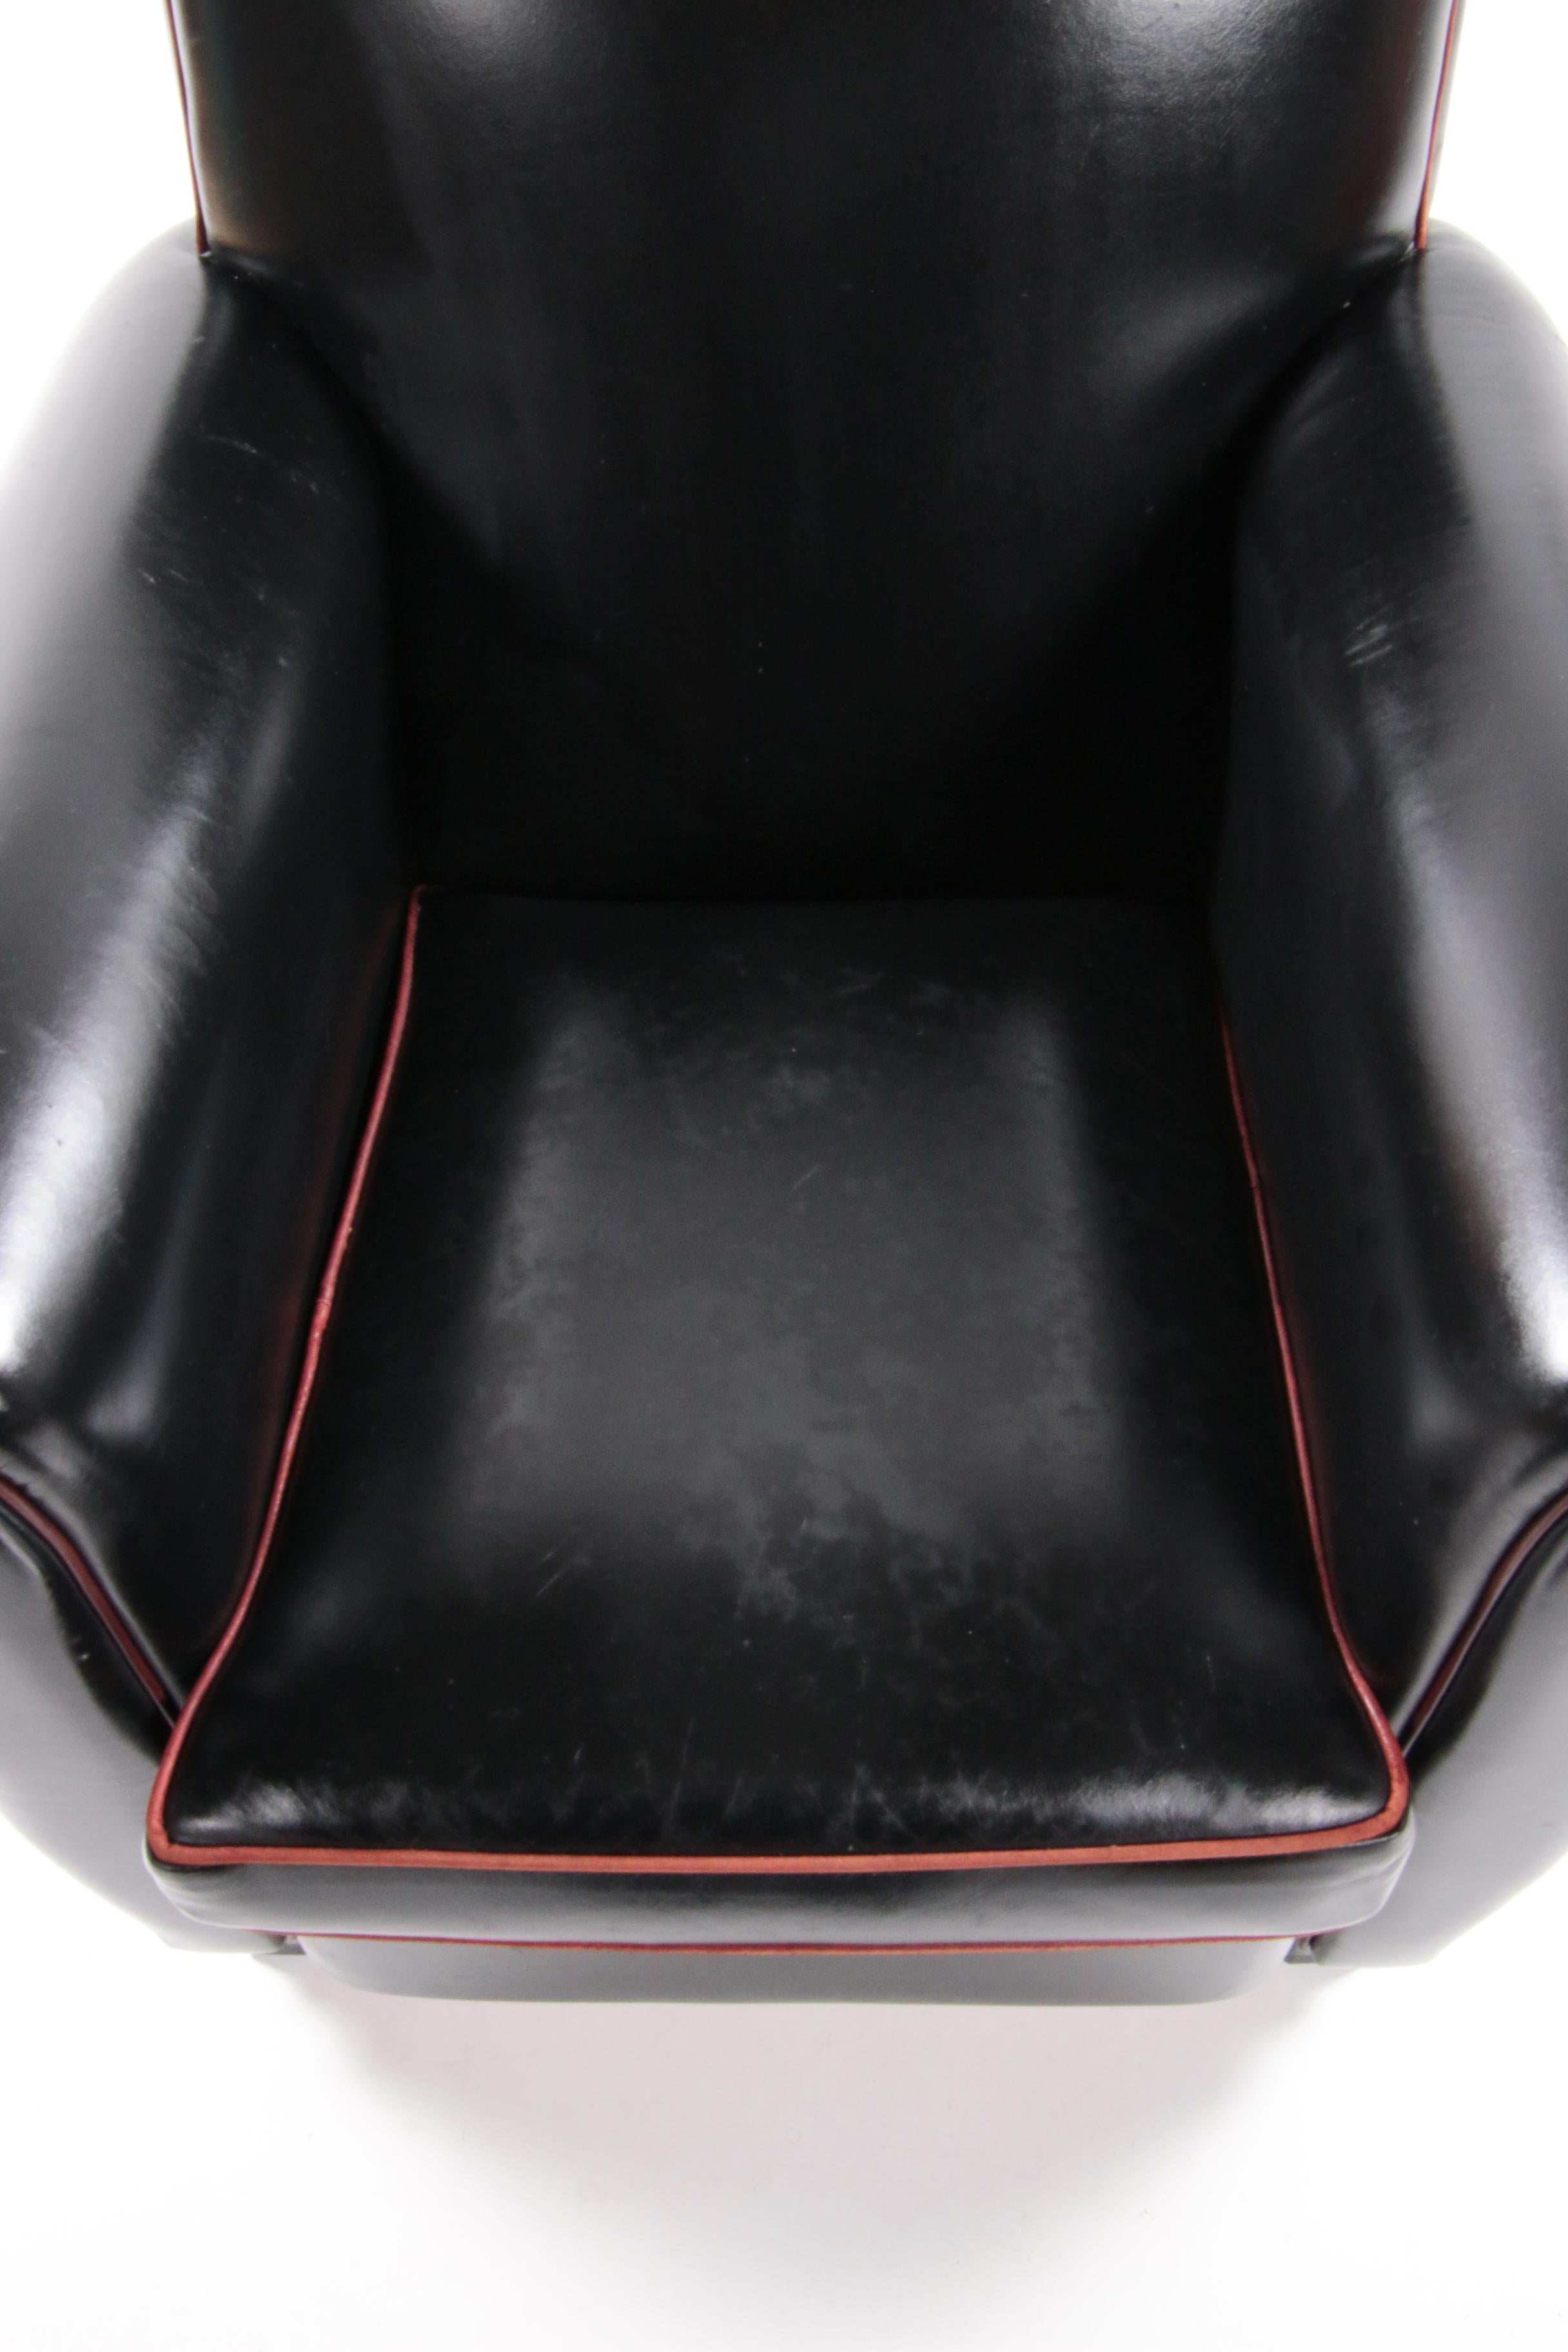 Very Comfortable and Beautiful Leather Armchair from LA Lounge Atelier For Sale 4